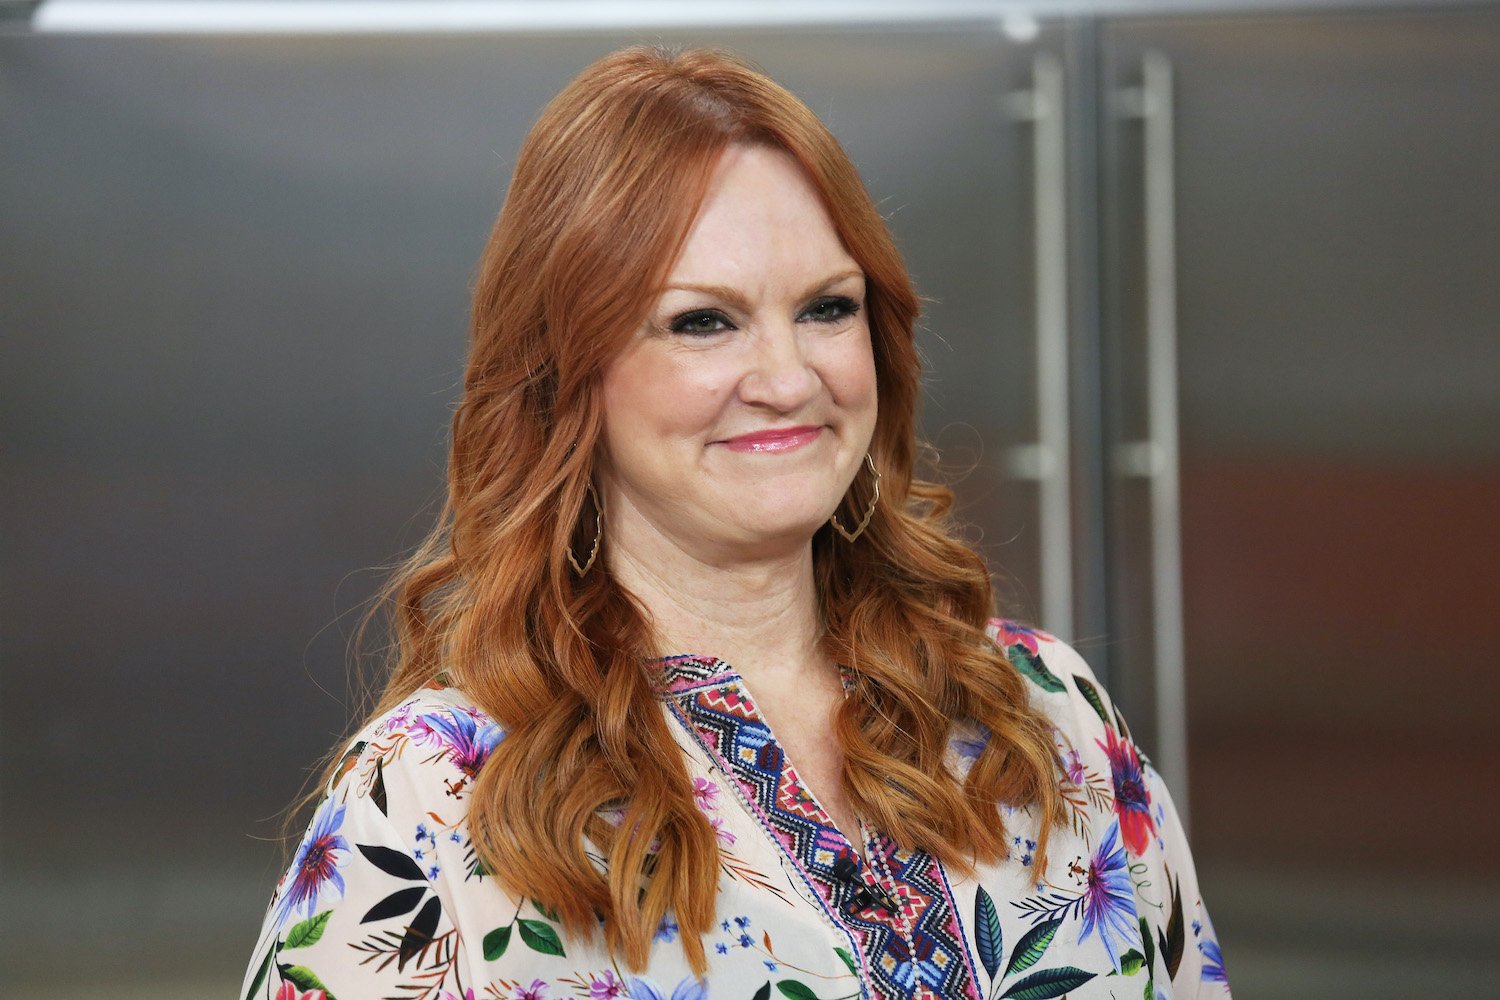 Ree Drummond on Today Show